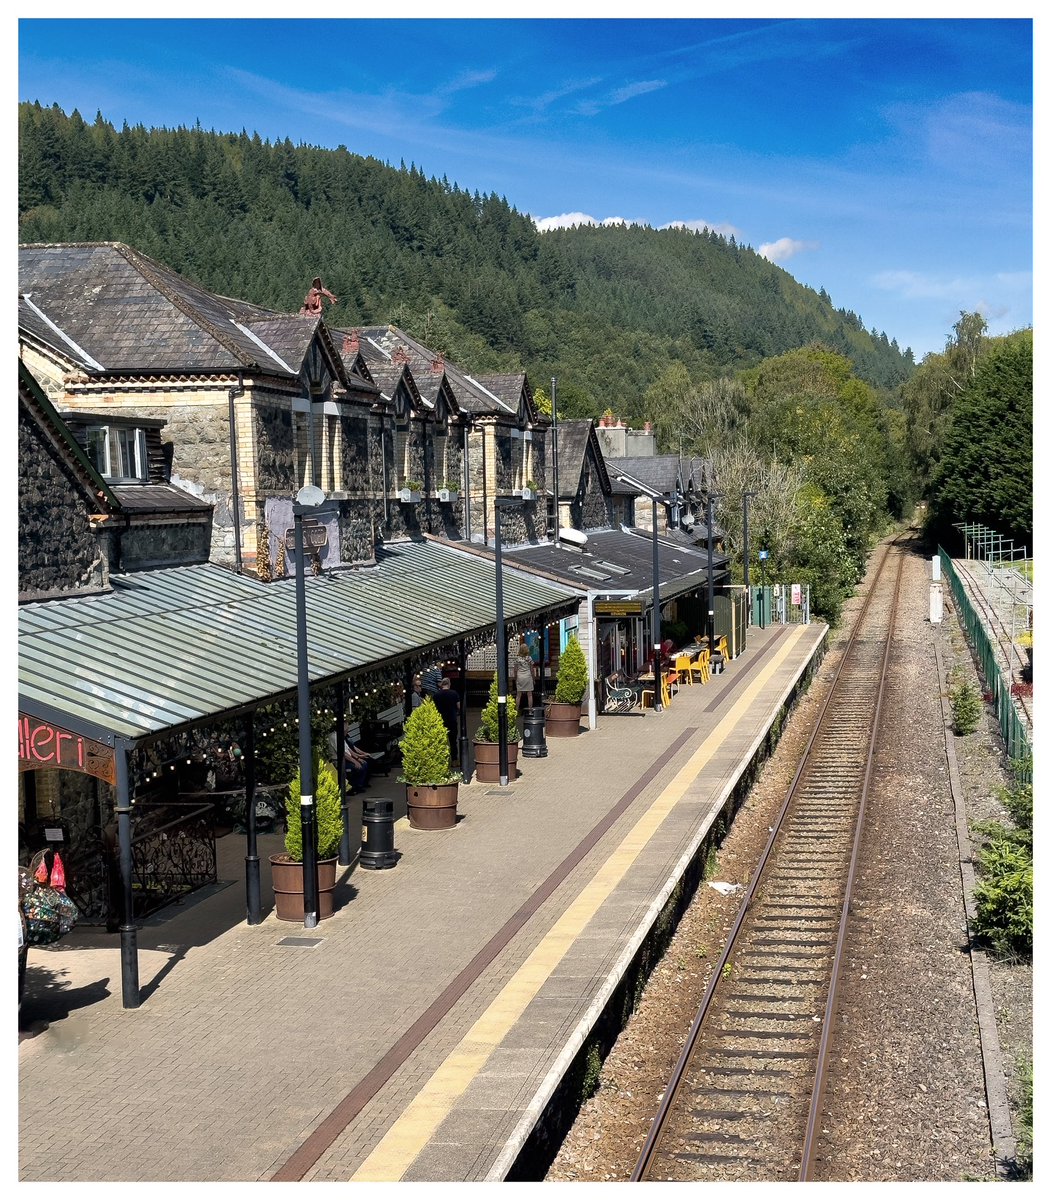 Gorsaf #BetwsYCoed Station - home to all the world’s wasps 😉👀 #Conwy #Cymru #Wales